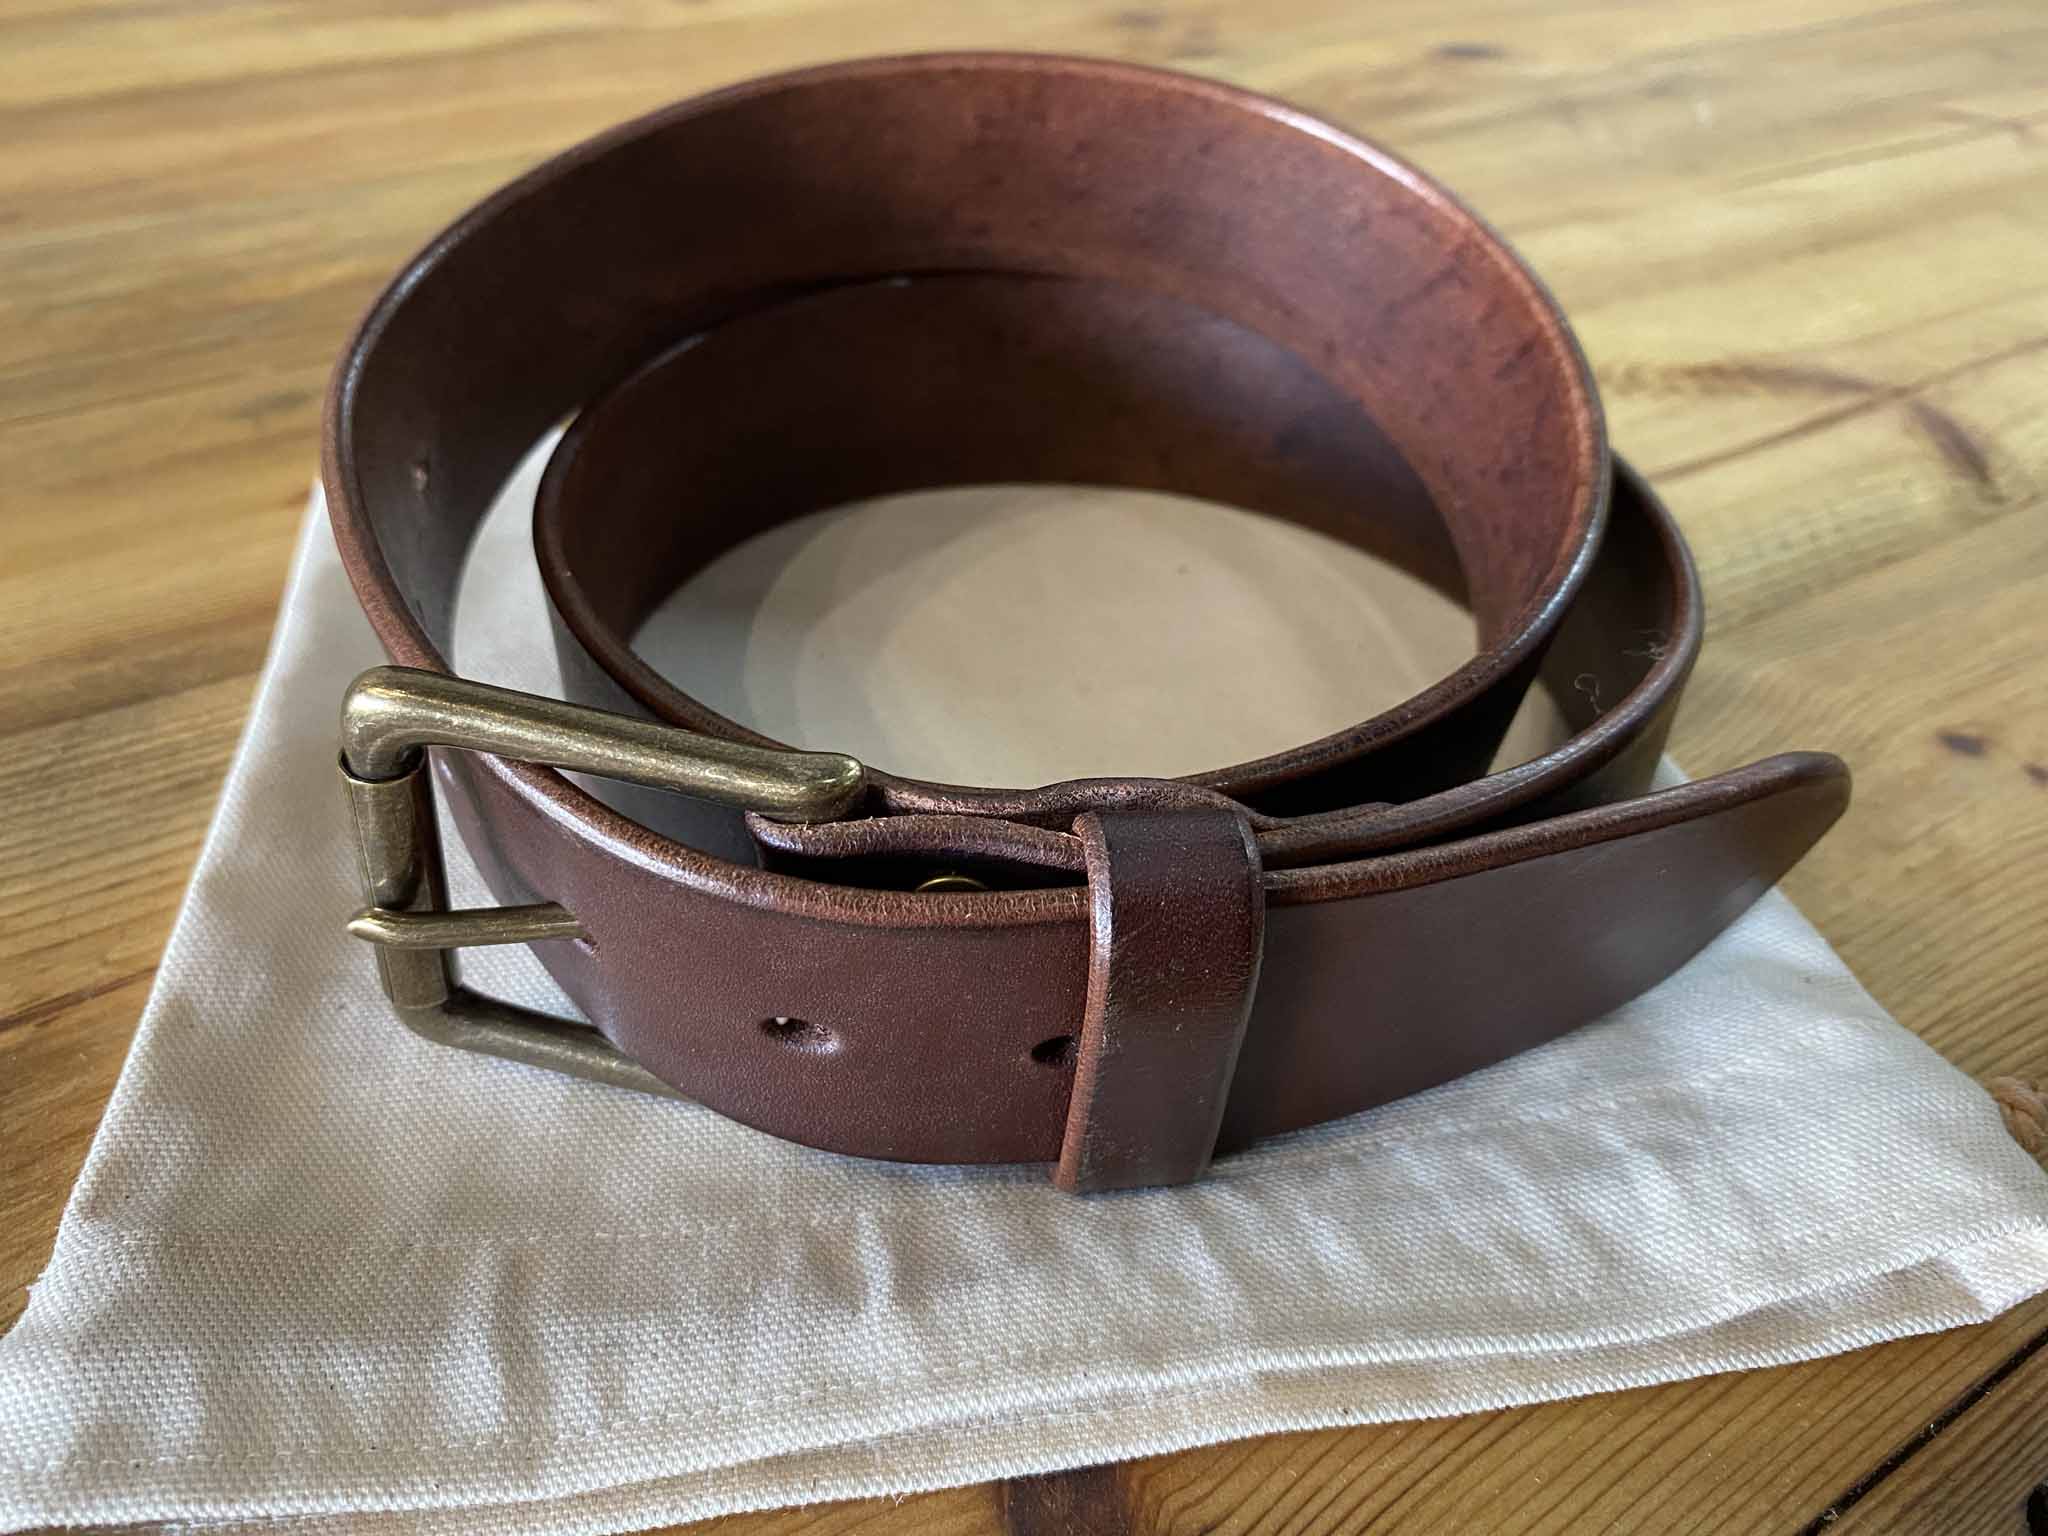 Choc-Brown "Riveted" Leather Jeans Belt